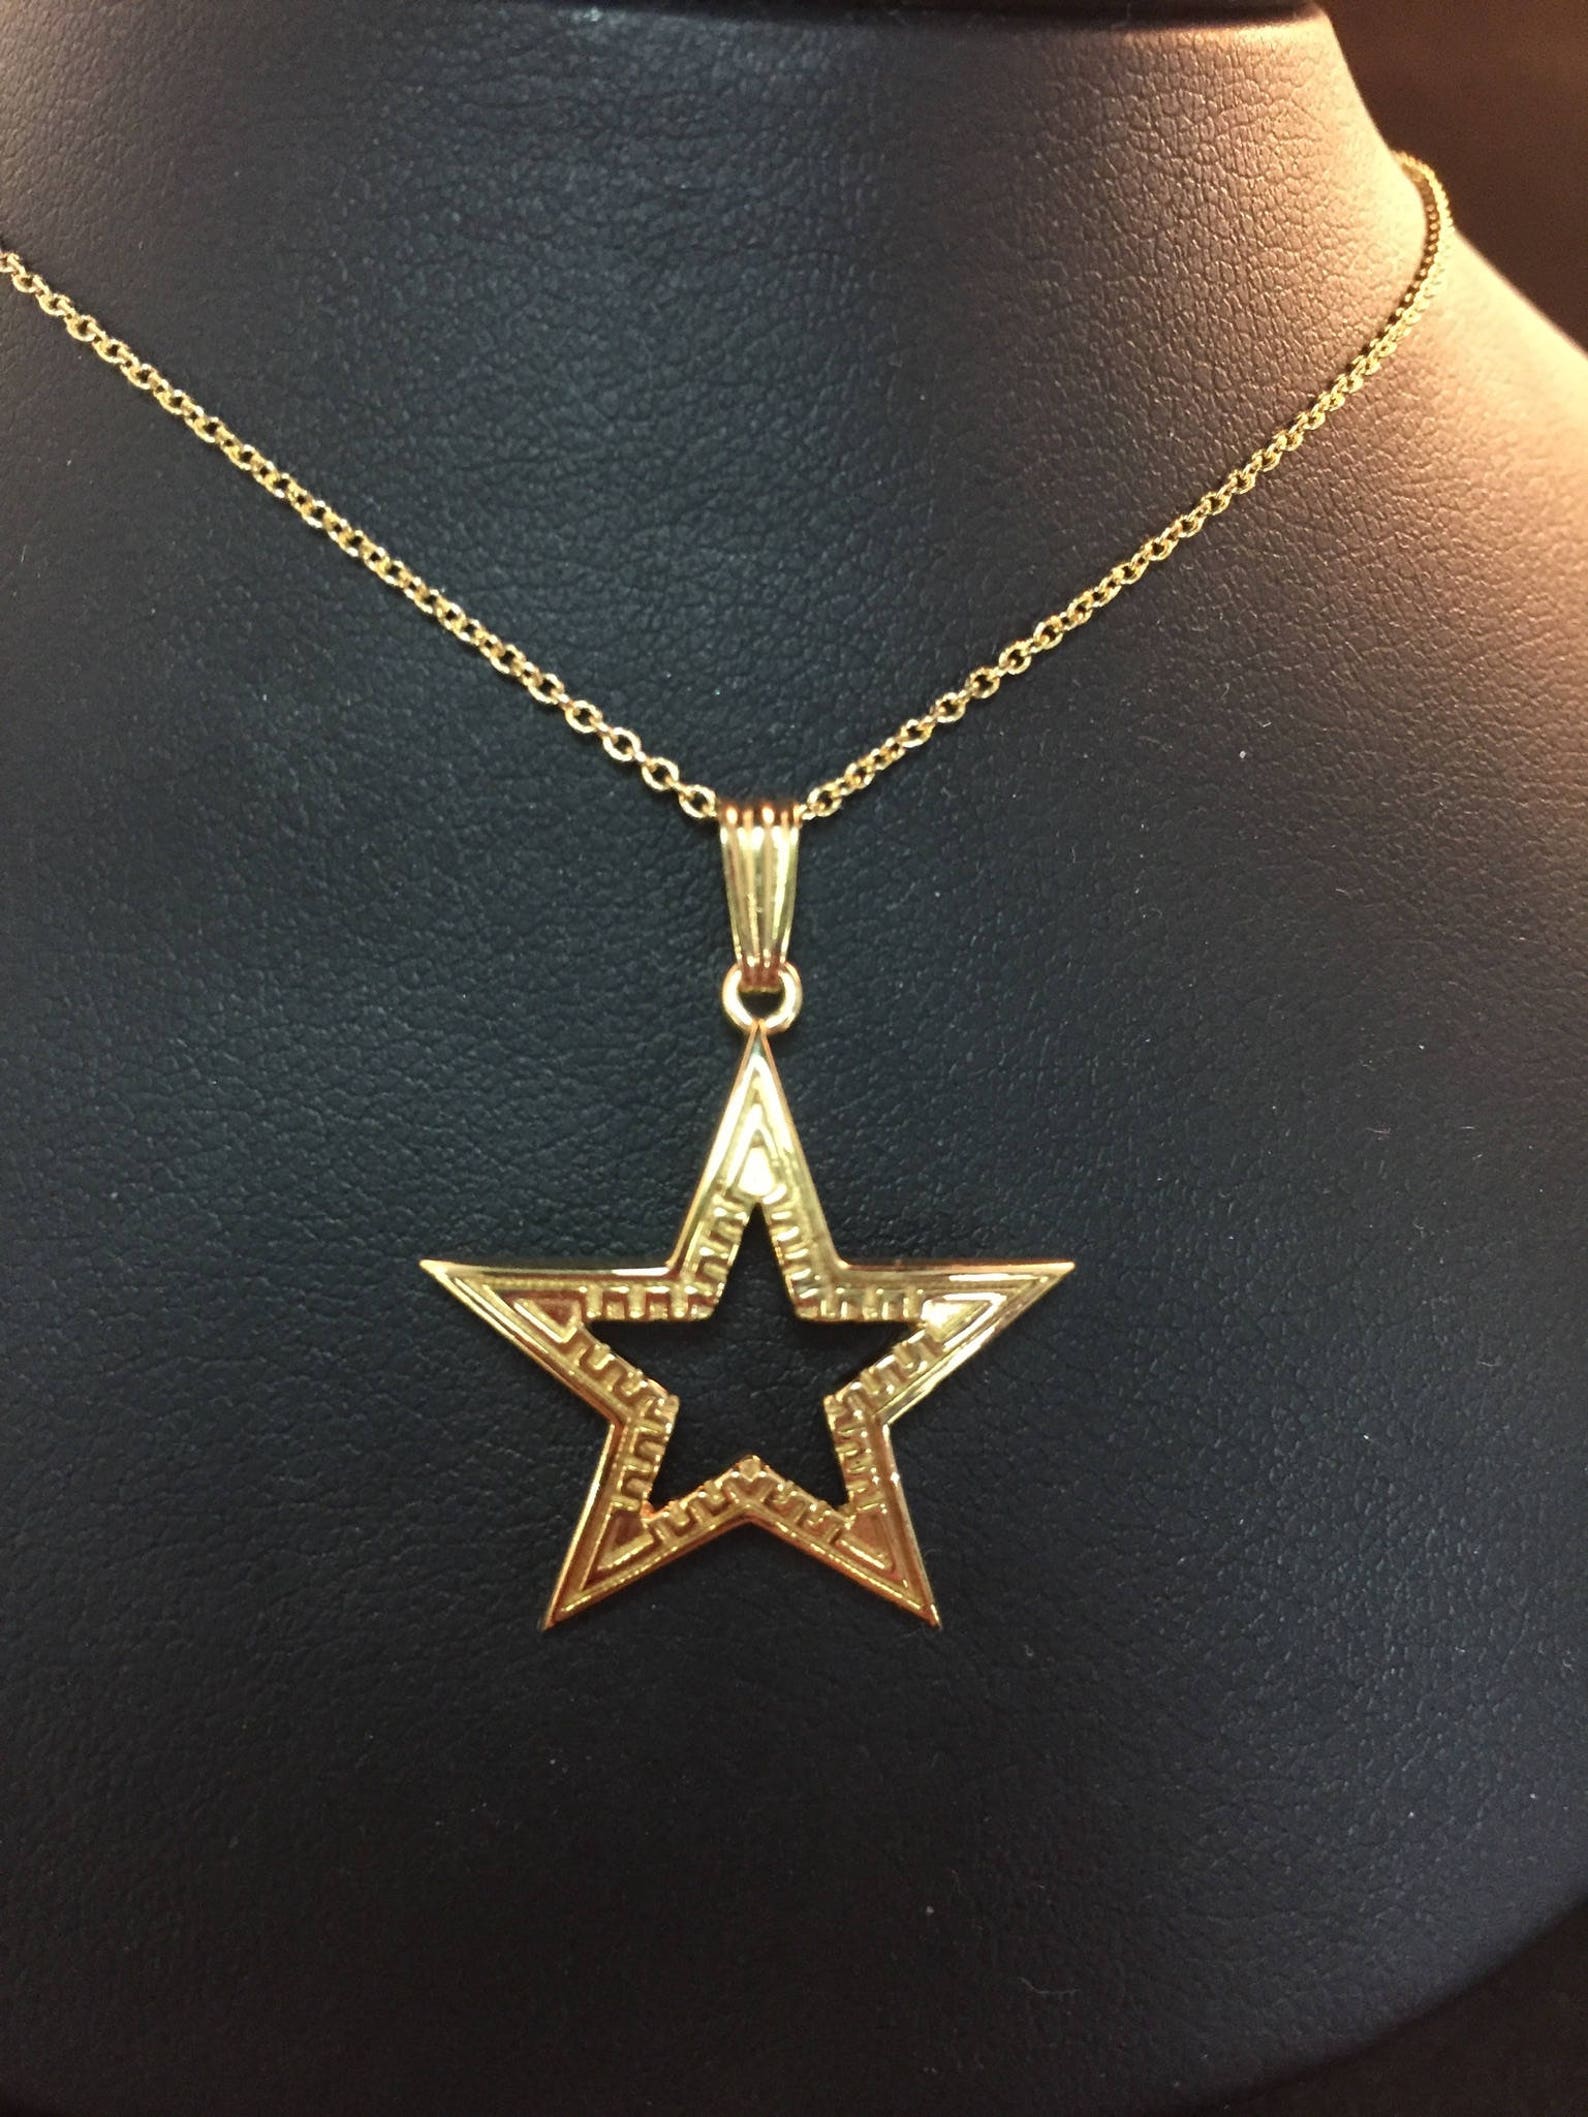 P.E.O. Star Necklace 14k Gold Over Sterling Silver - Etsy